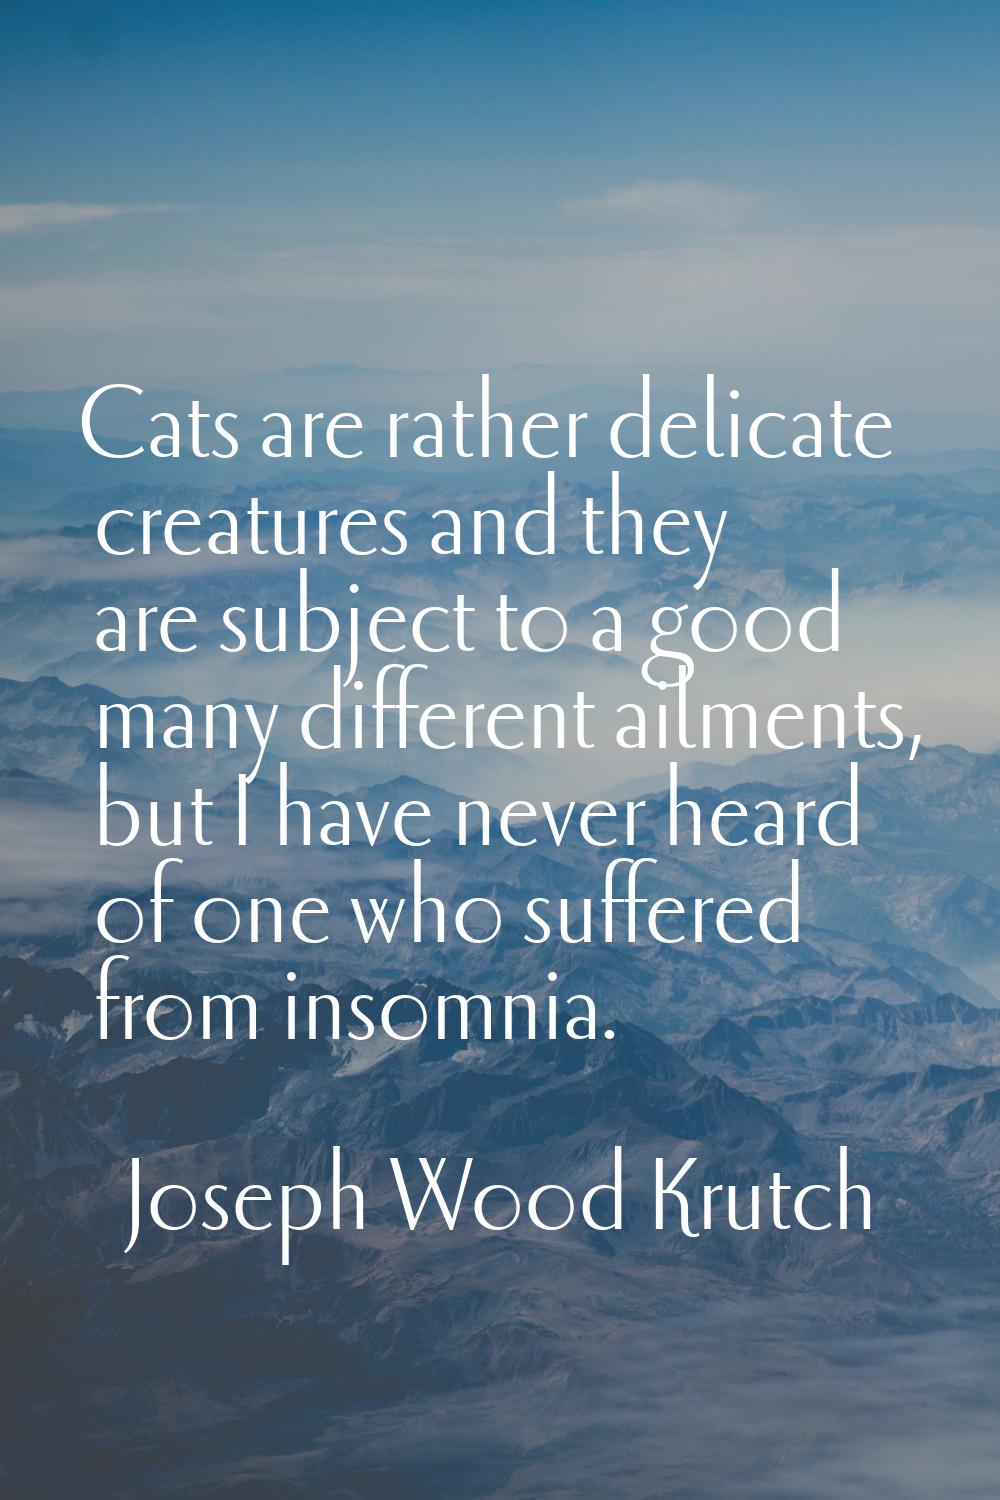 Cats are rather delicate creatures and they are subject to a good many different ailments, but I ha